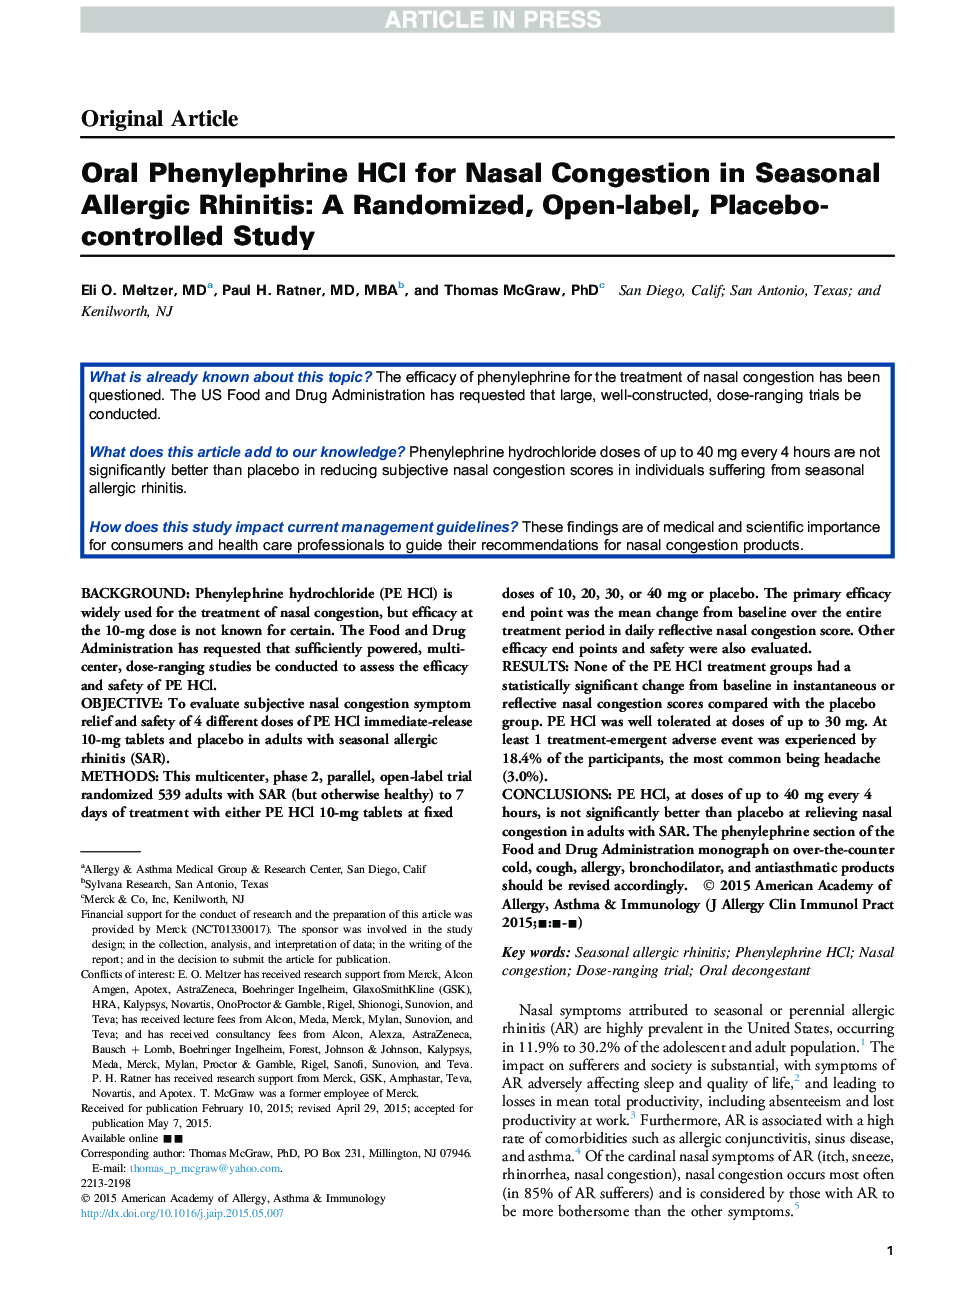 Oral Phenylephrine HCl for Nasal Congestion in Seasonal Allergic Rhinitis: A Randomized, Open-label, Placebo-controlled Study